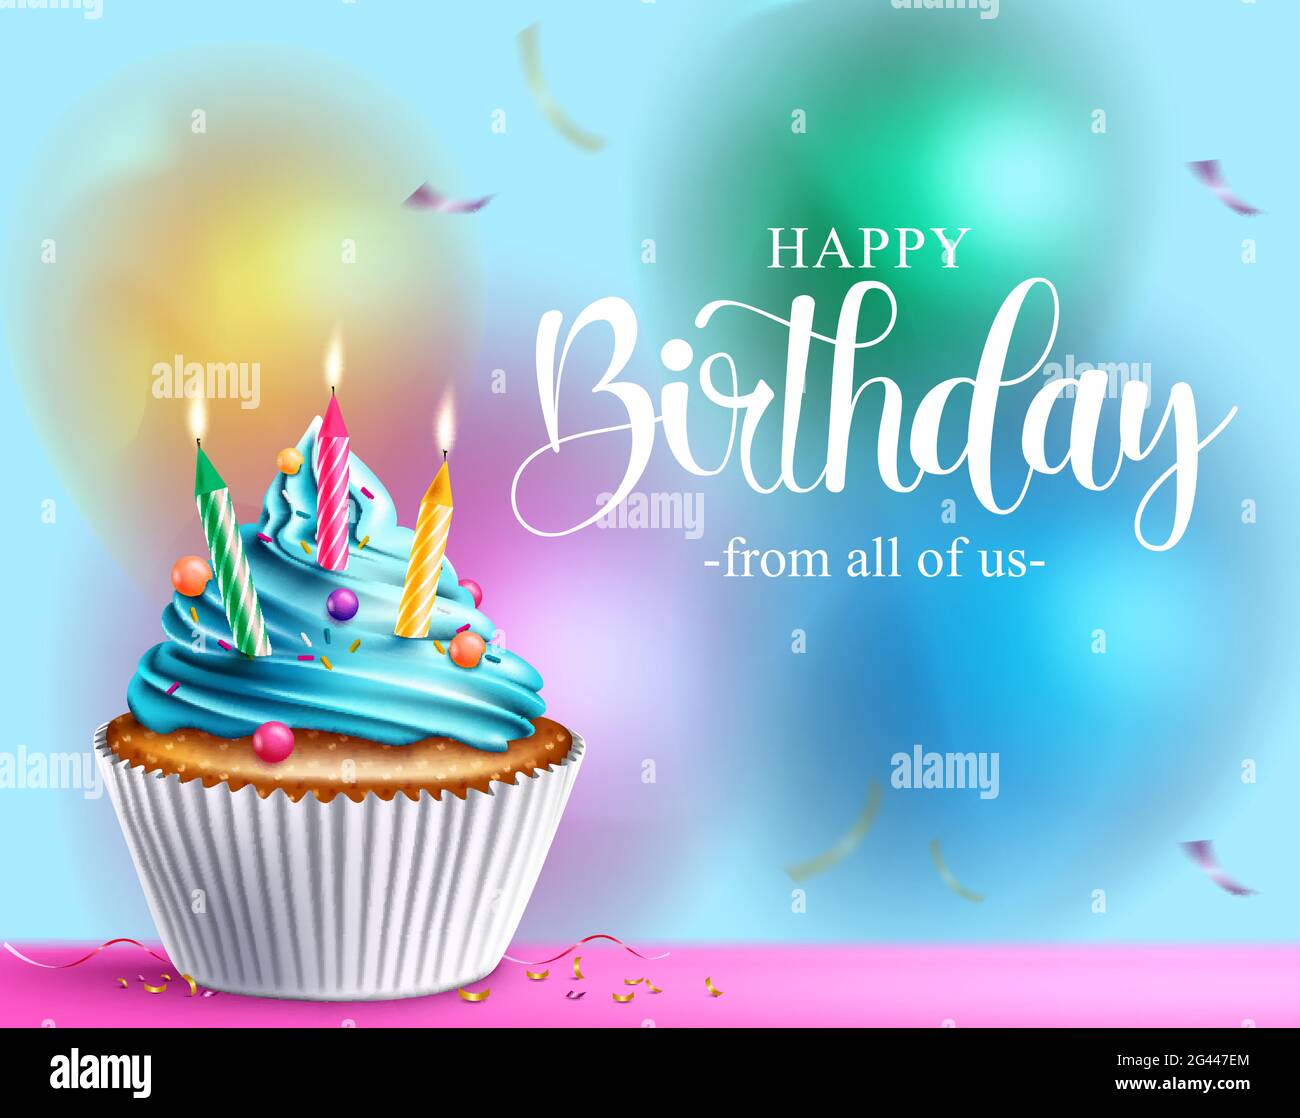 Birthday cupcake vector design. Happy birthday text with cupcake, candles and icing elements for celebrating birth day decoration greeting card. Stock Vector